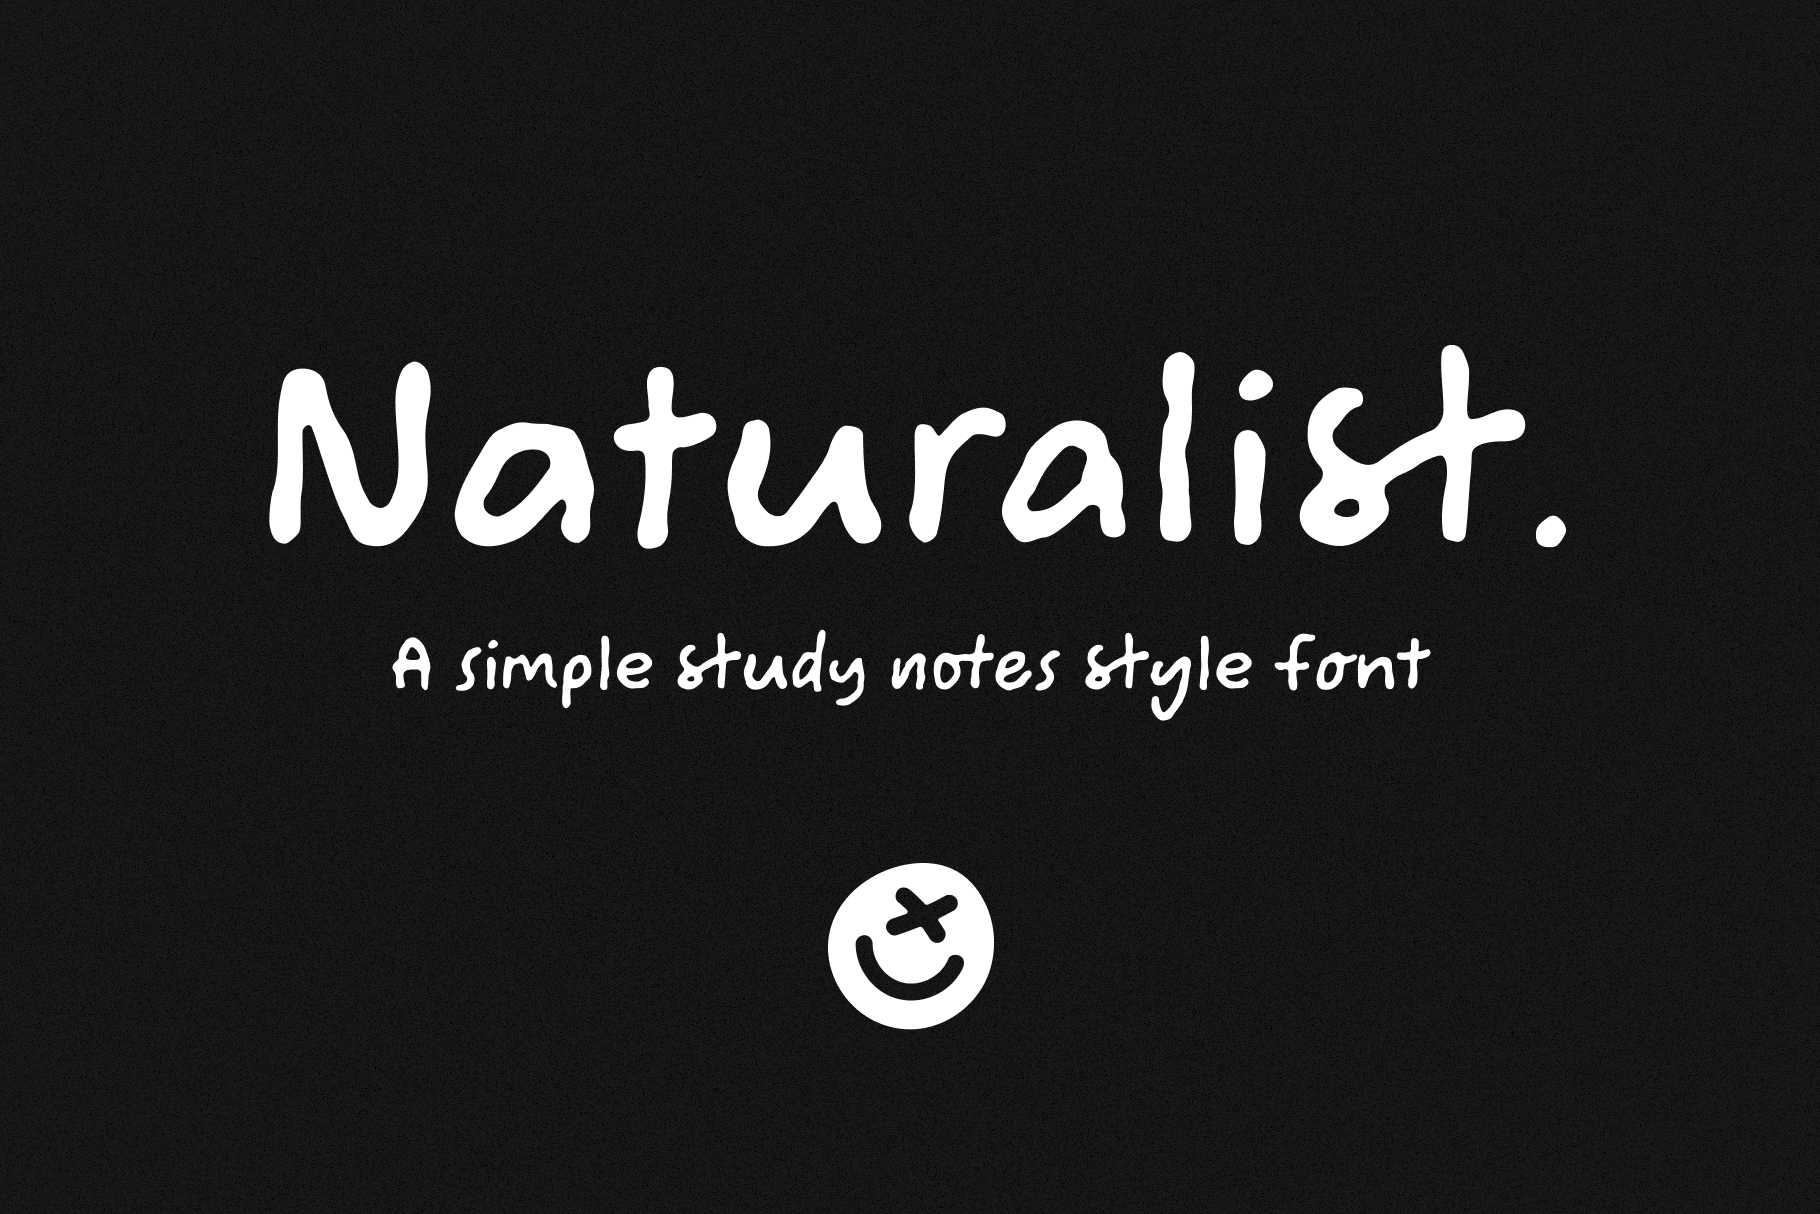 Naturalist: Take your notes from bland to brilliant with this simple “study notes” style font.